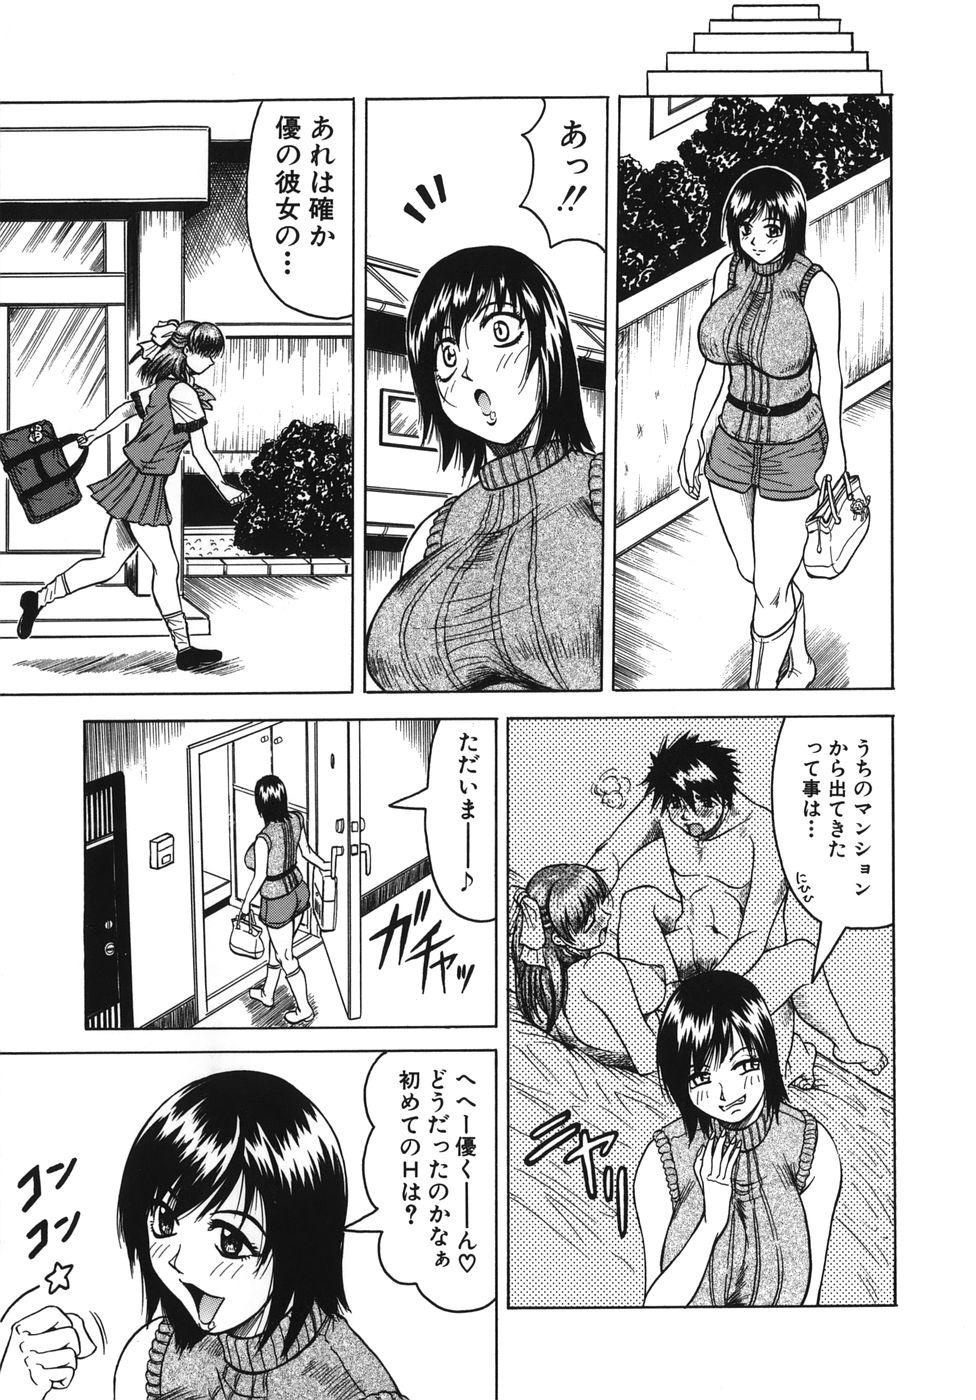 Jerking [Jamming] Onee-chan ni Omakase - Leave to Your Elder Sister Collar - Page 11